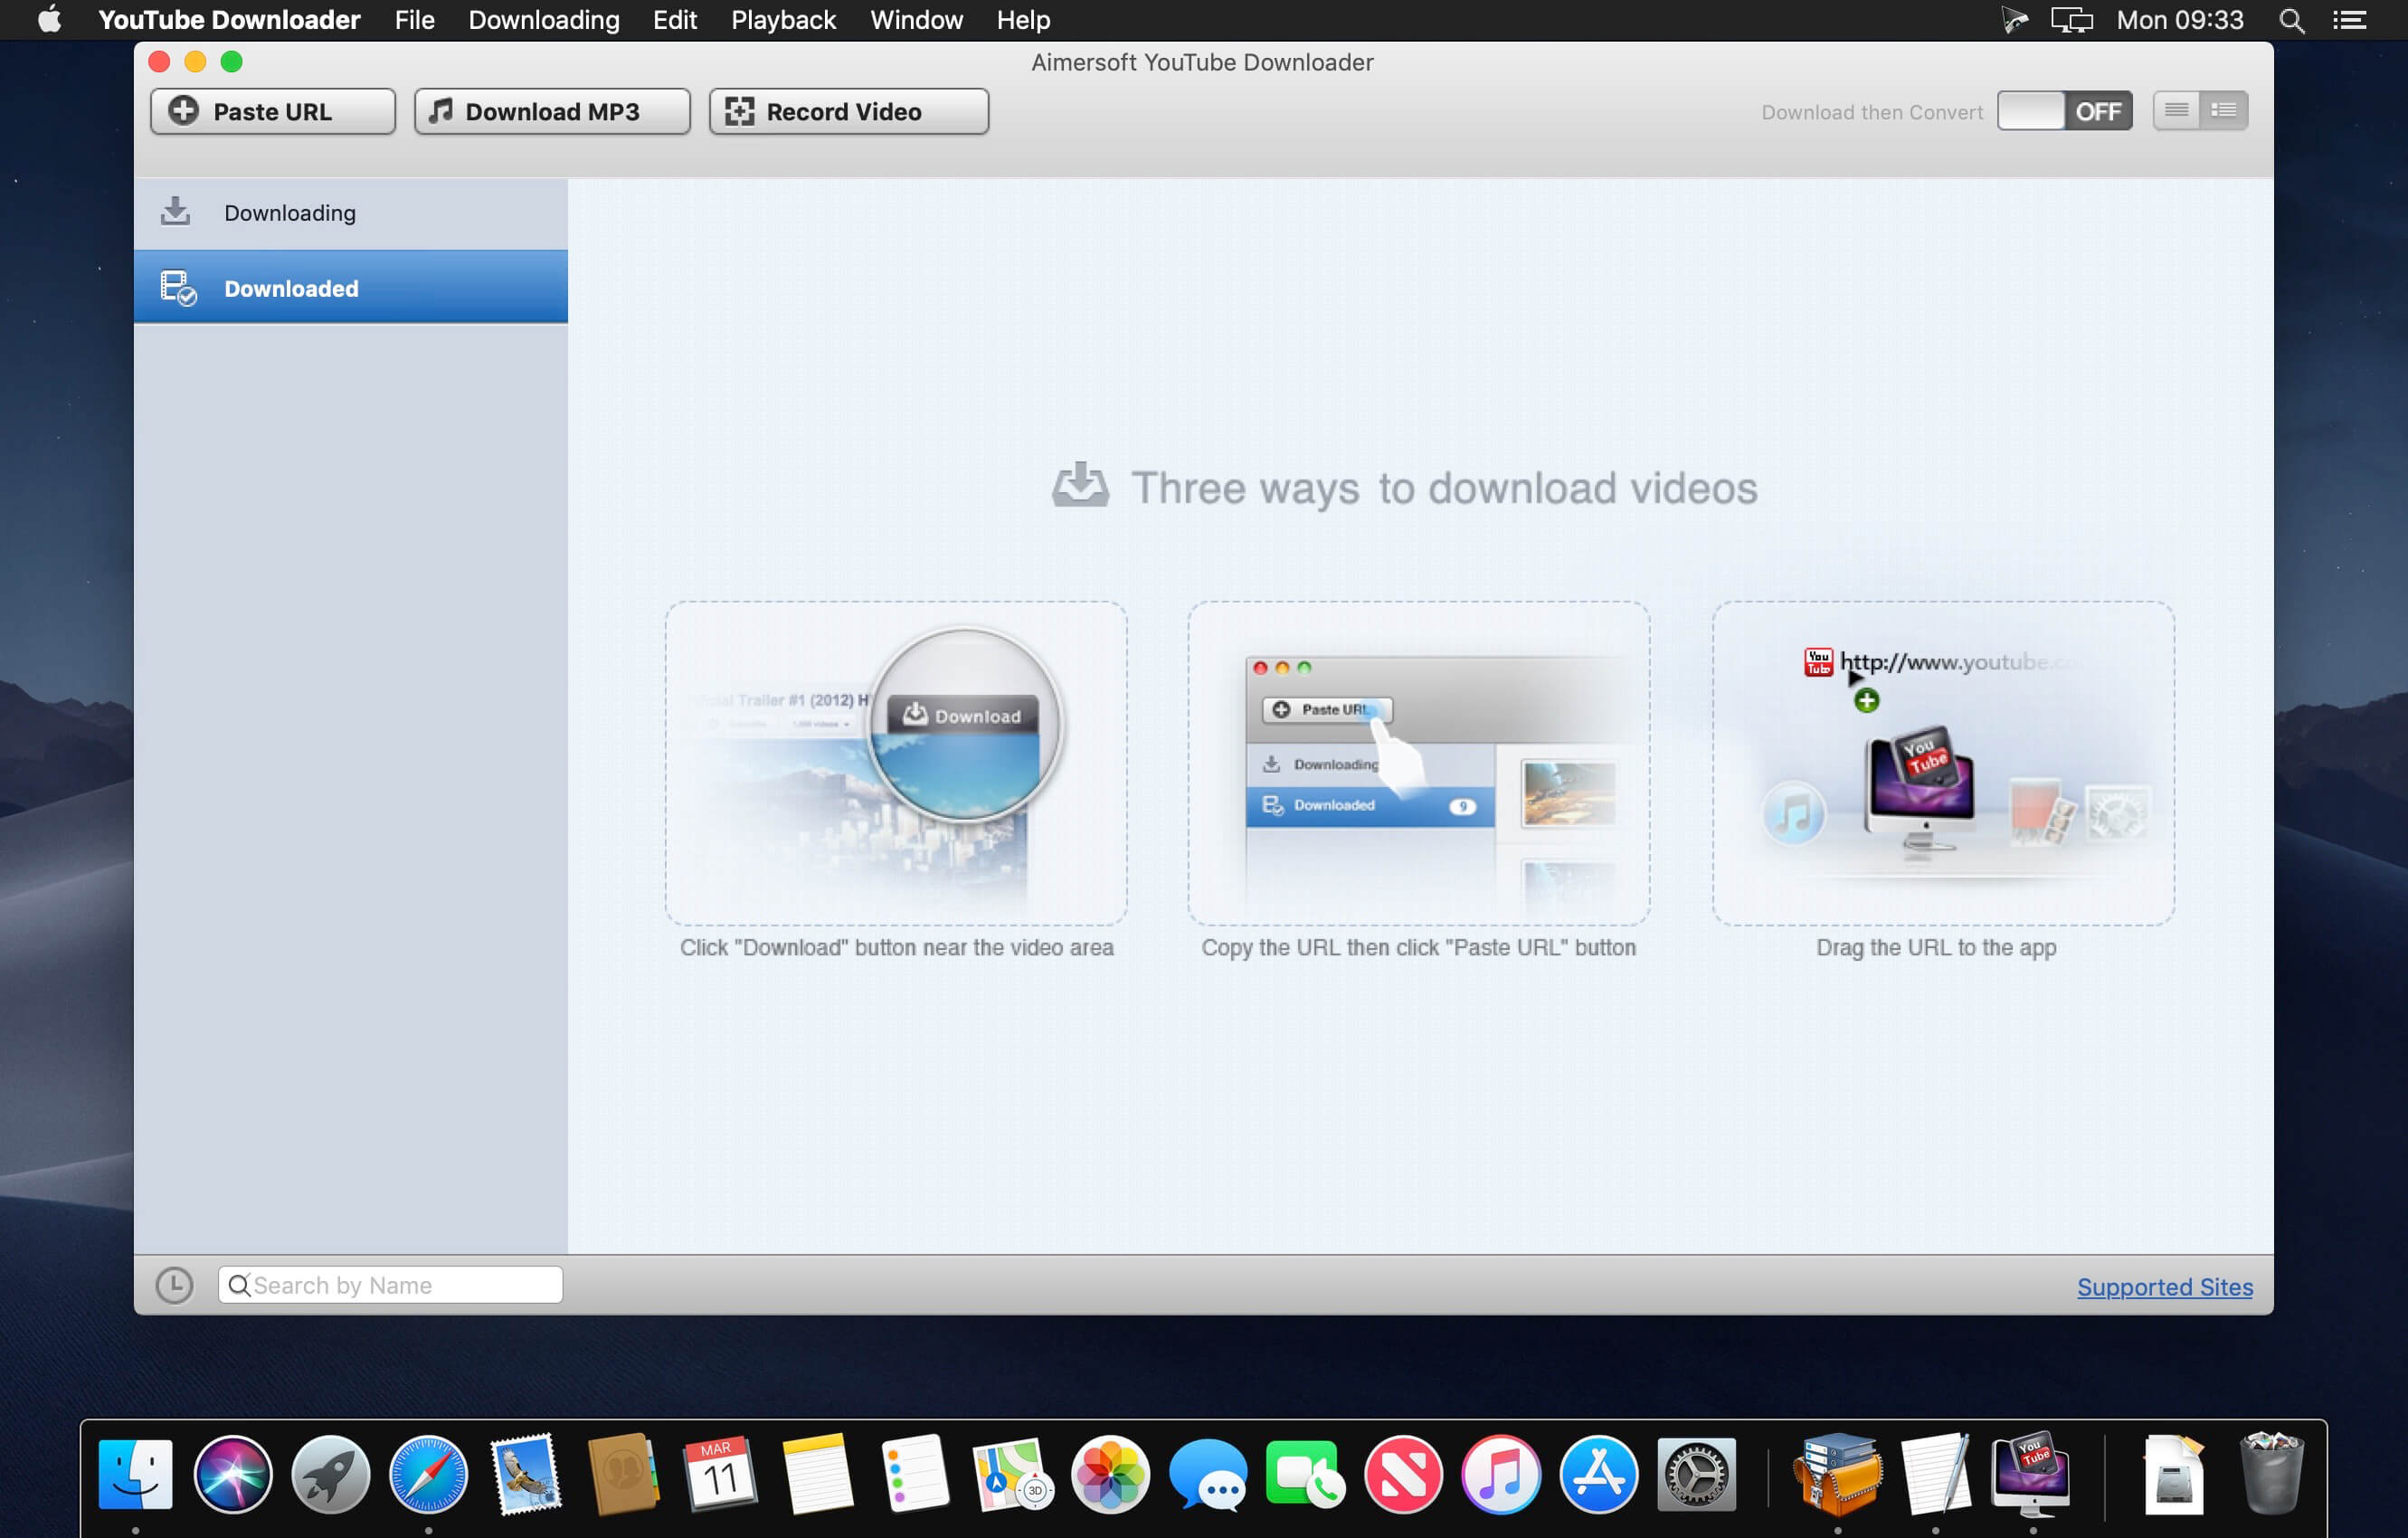 Aimersoft YouTube Downloader 5.7.3 Download